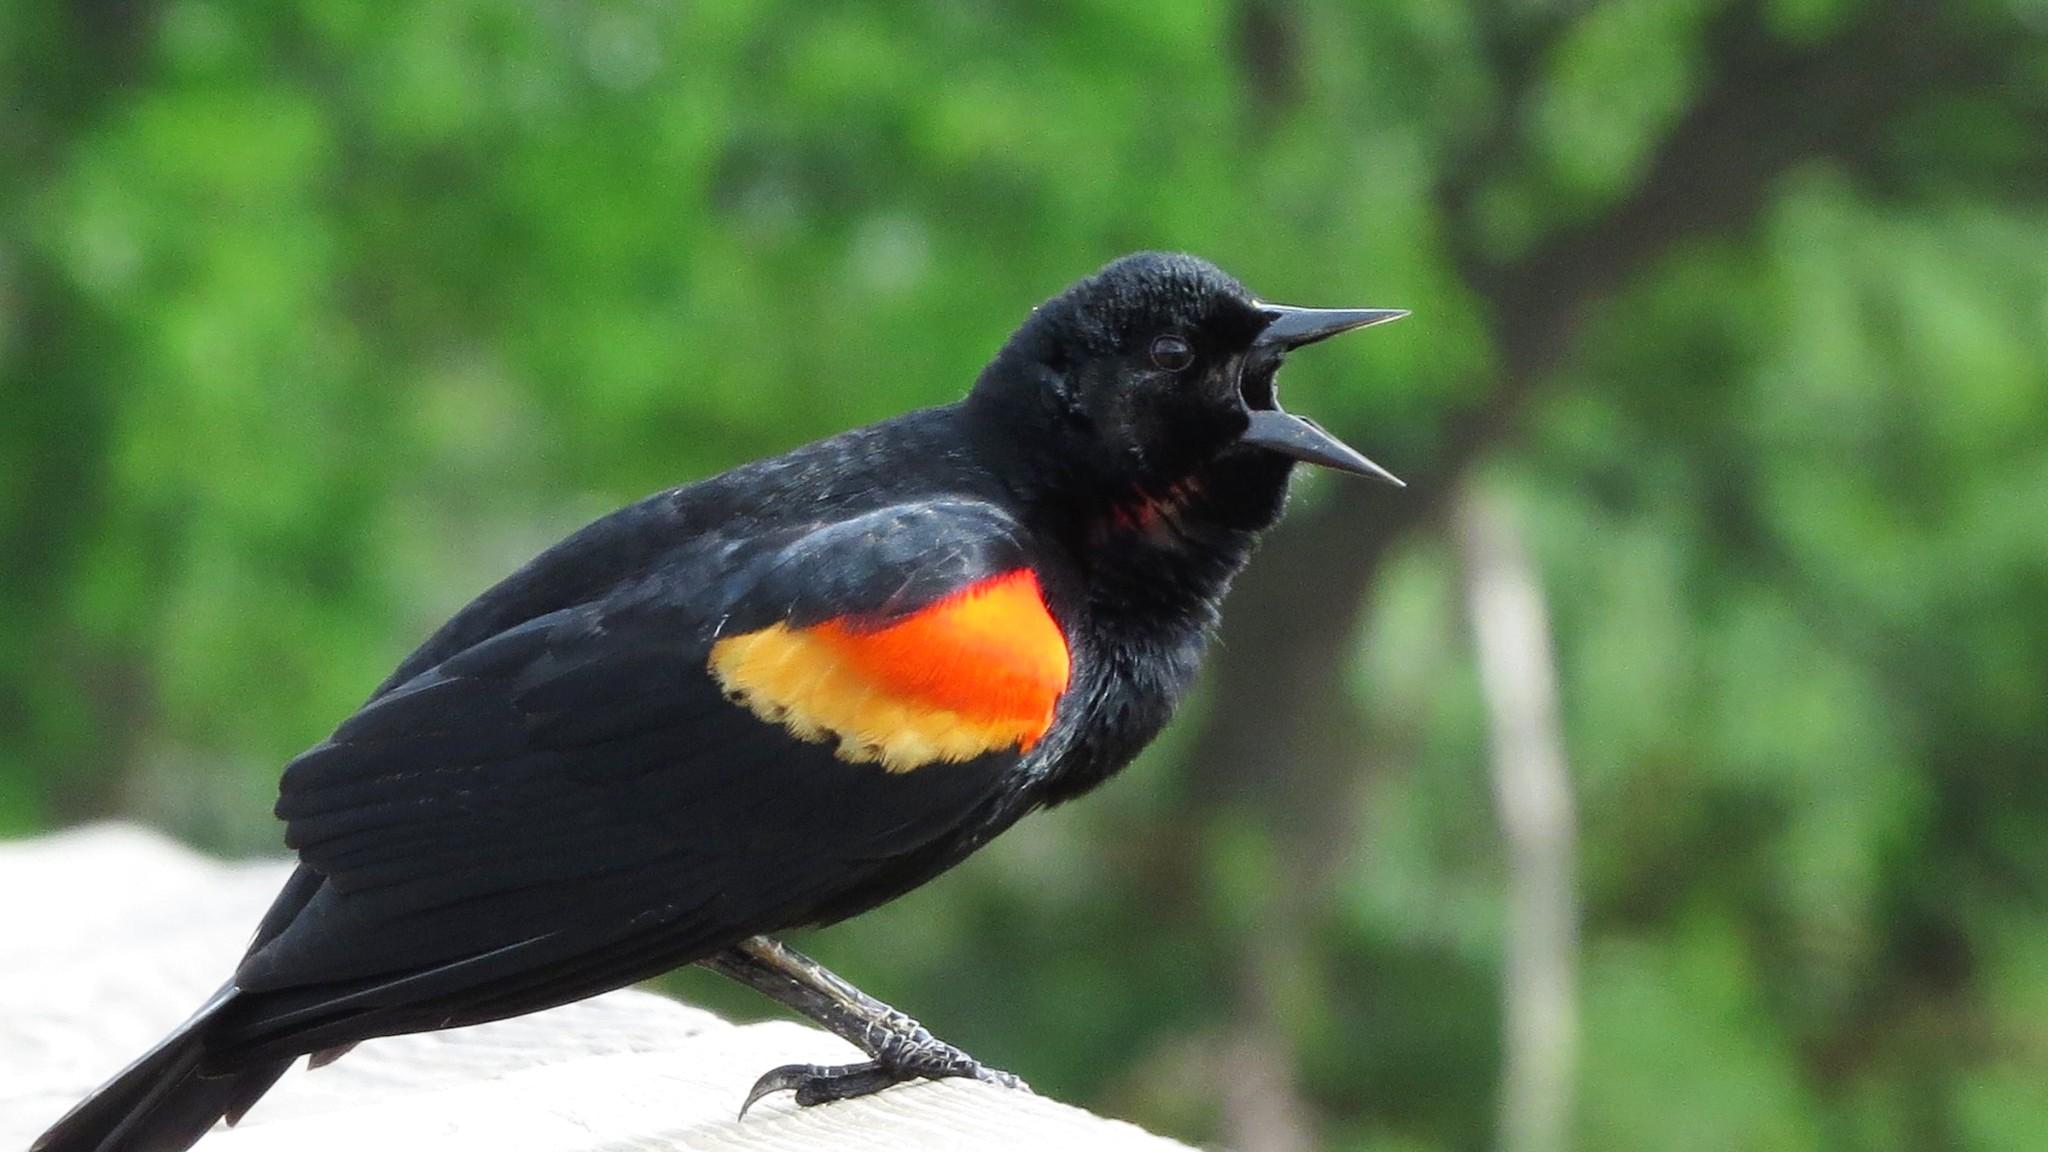 The red-winged blackbird was among the most observed species in Chicago for the 2022 City Nature Challenge. (Susan Young / Flickr Creative Commons)